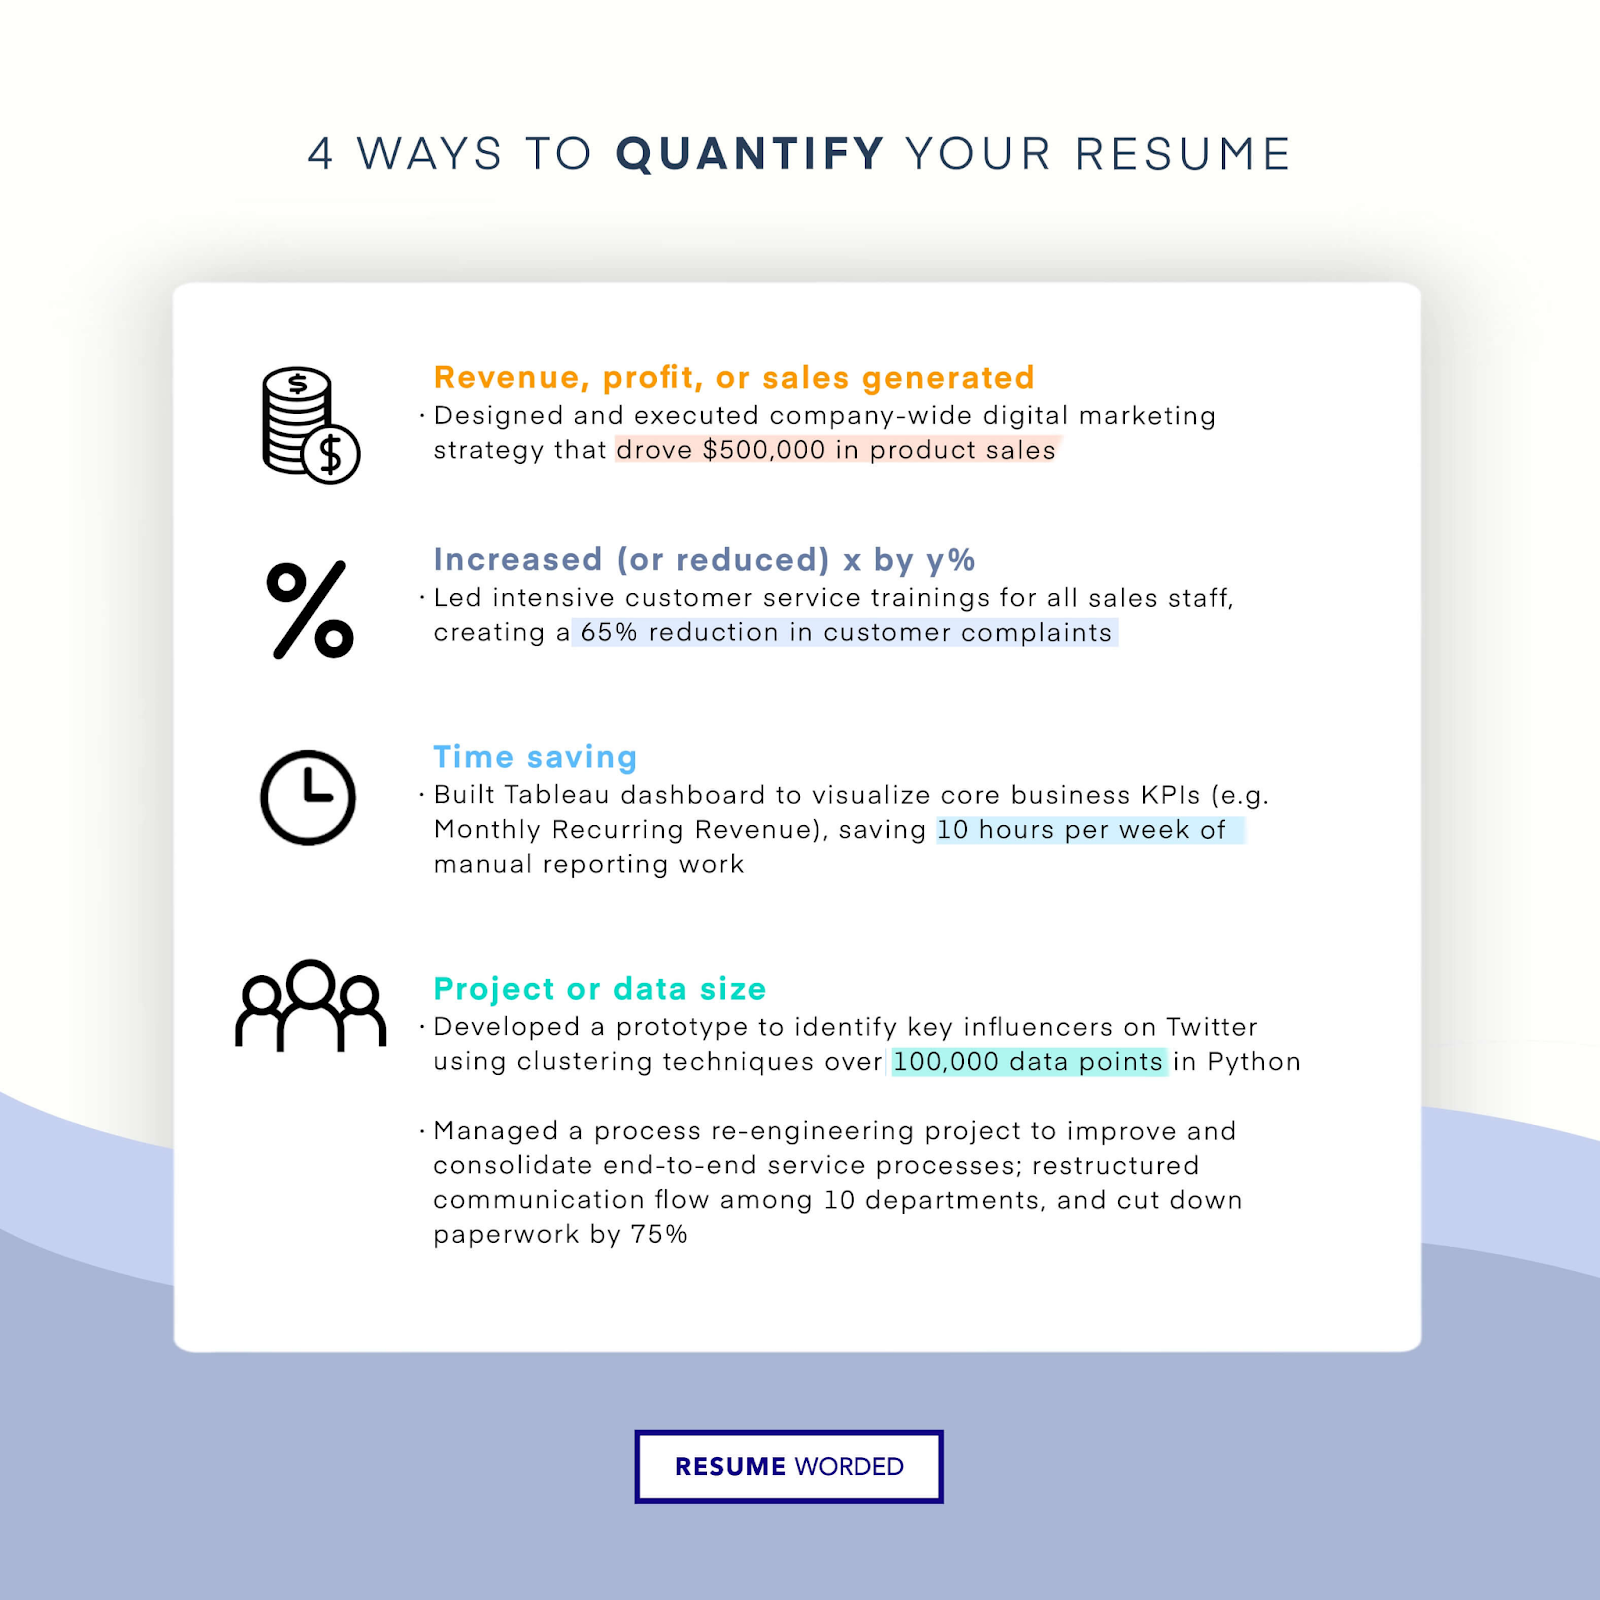 How to improve your resume with quantifiable metrics